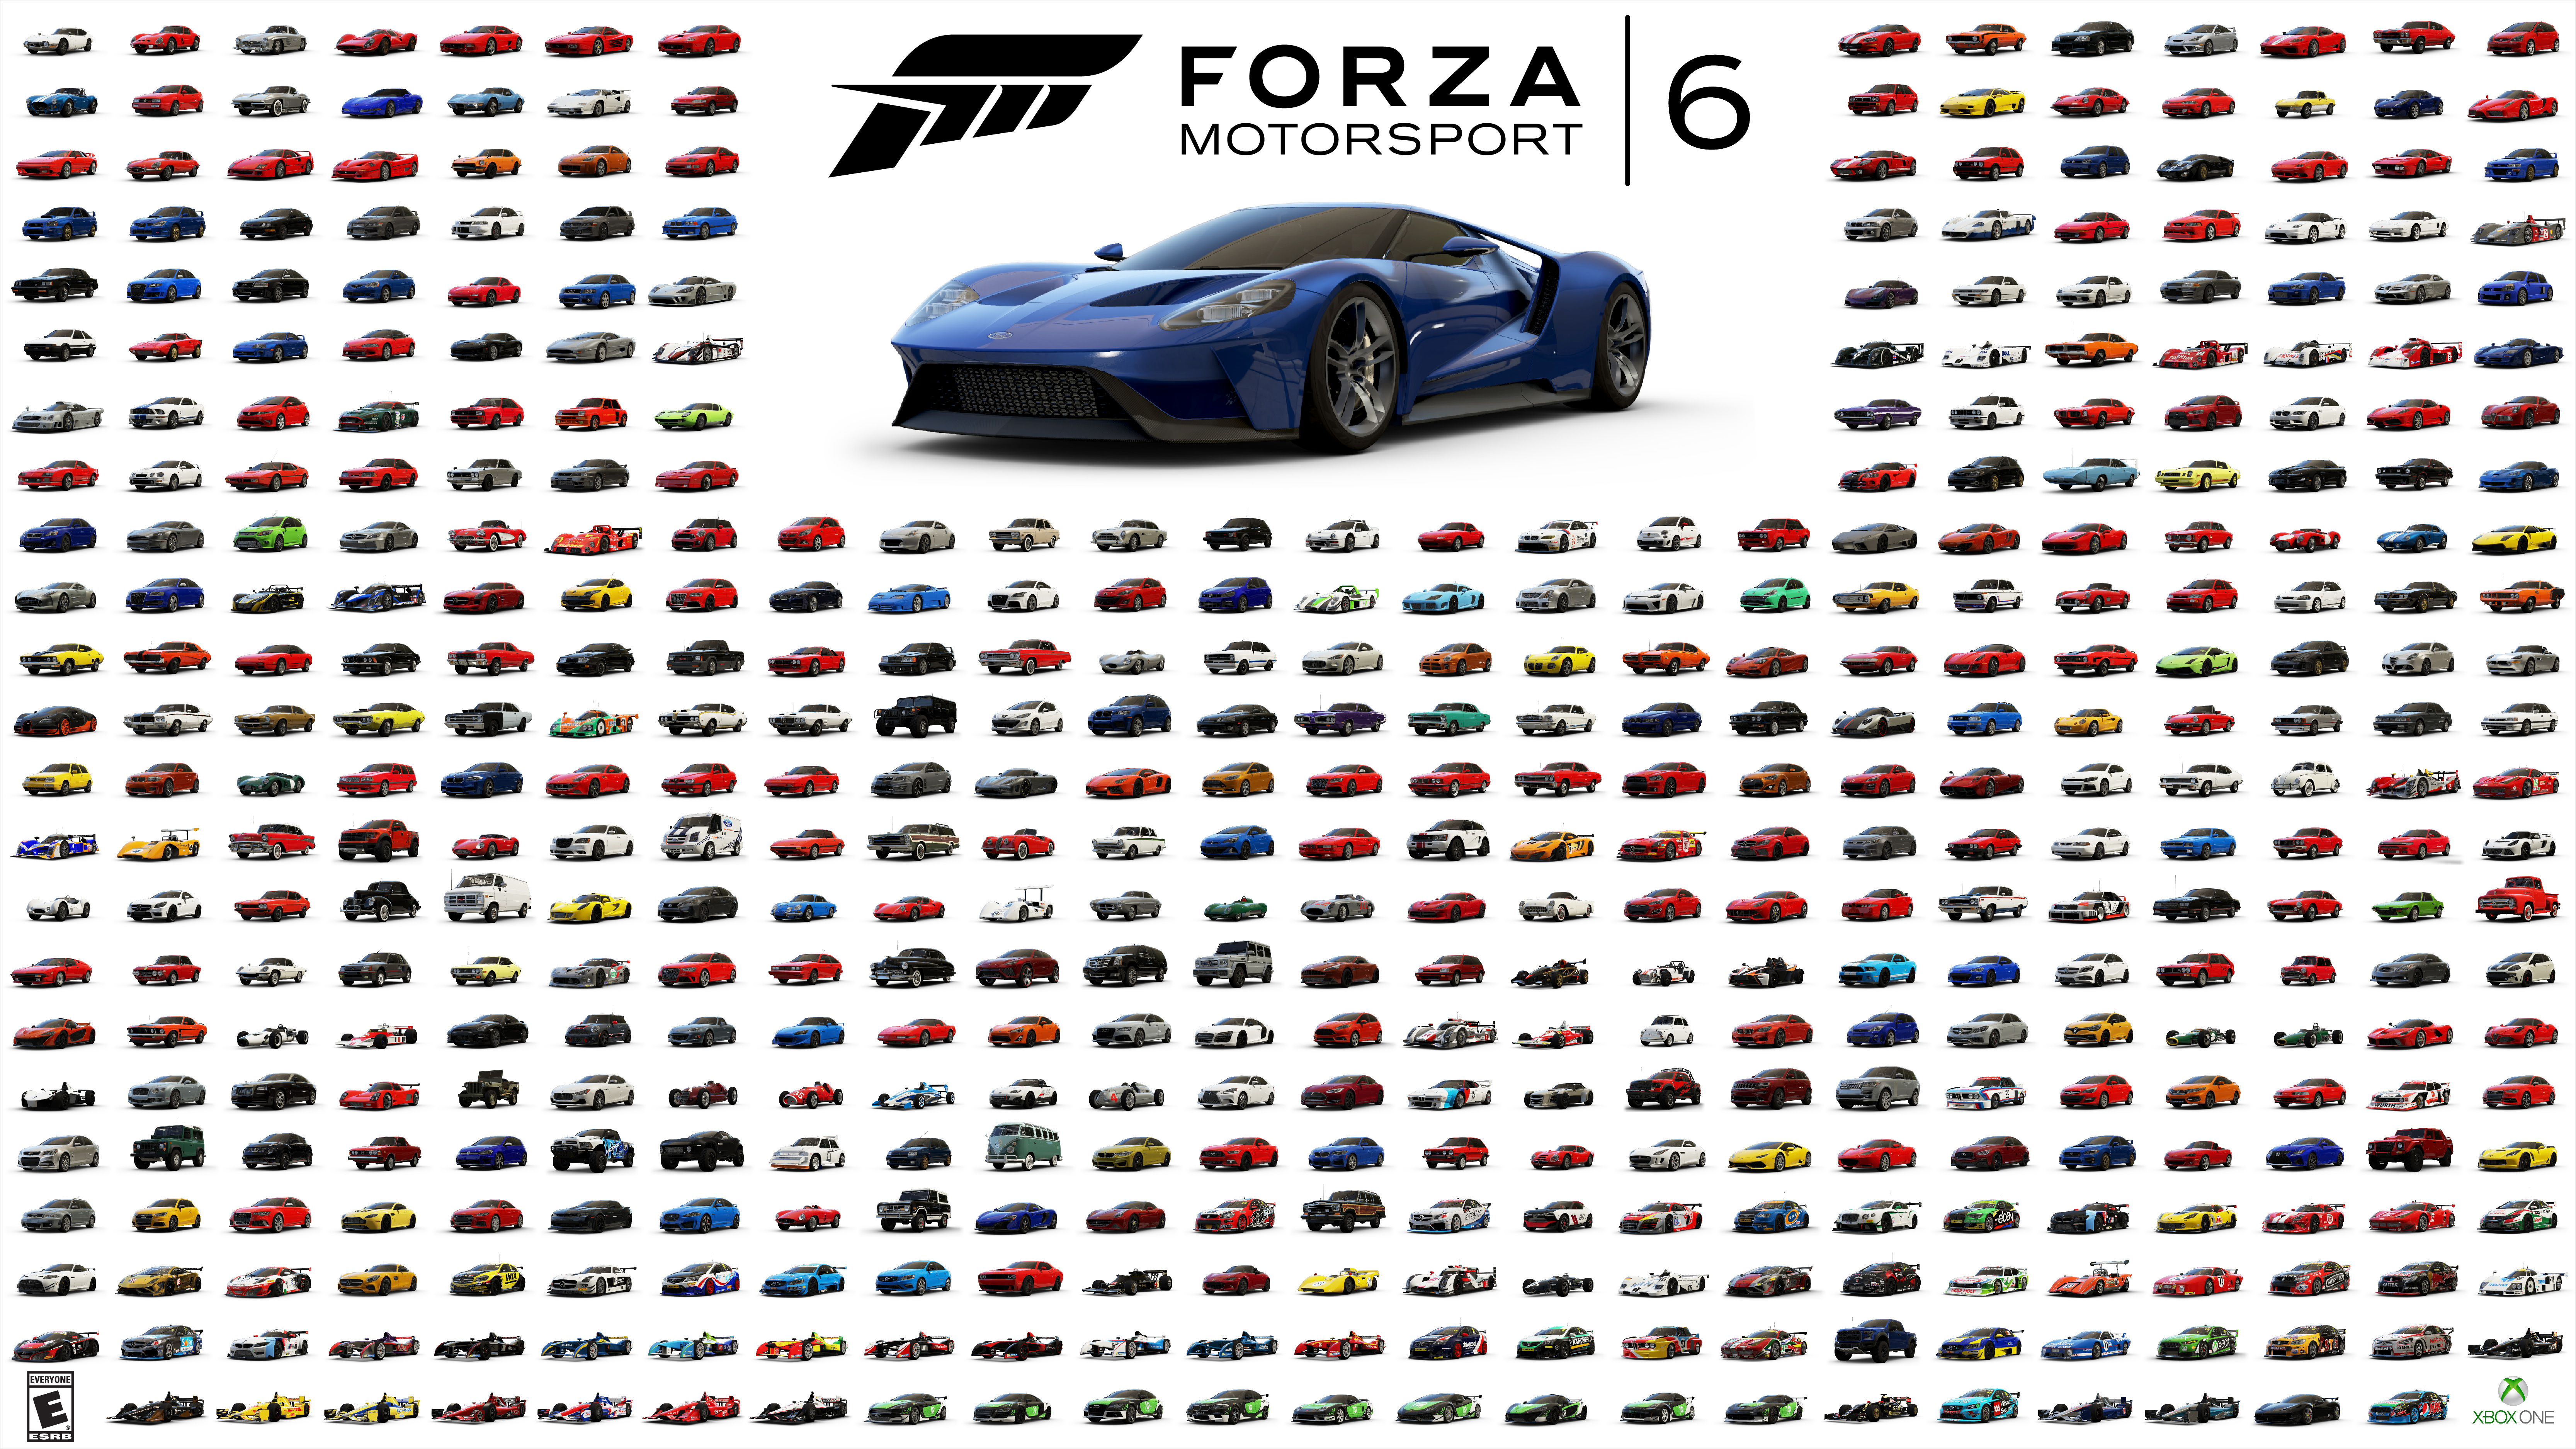 Forza Motorsport 6 Has Gone Gold! Demo Arrives Sept. 1 - Xbox Wire